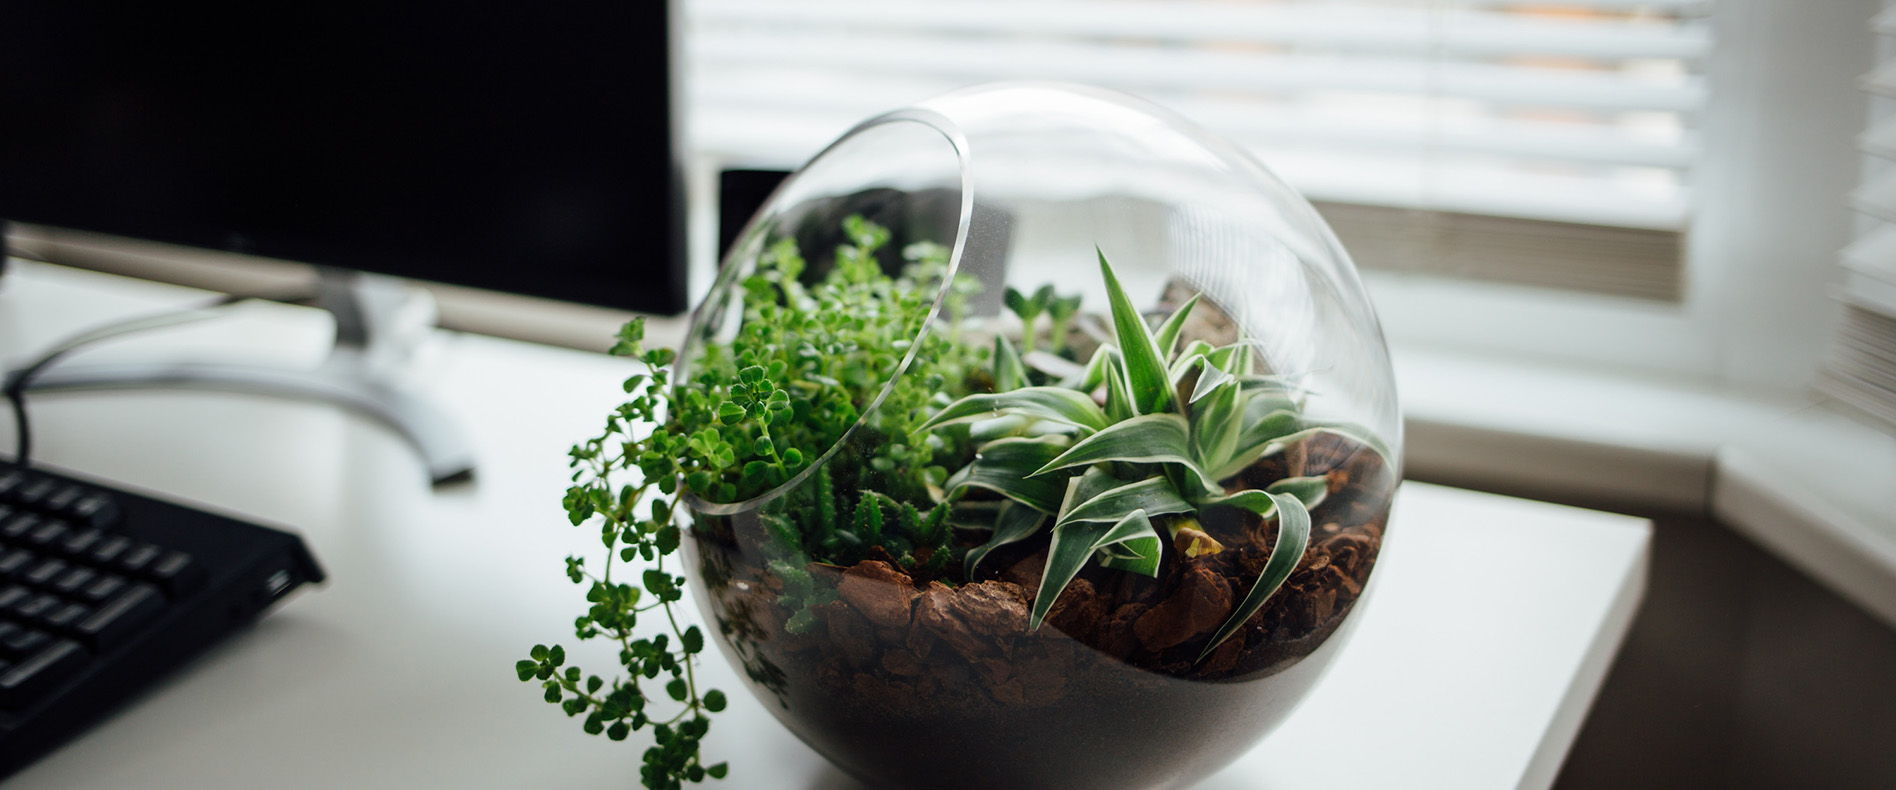 Terrarium filled with plants